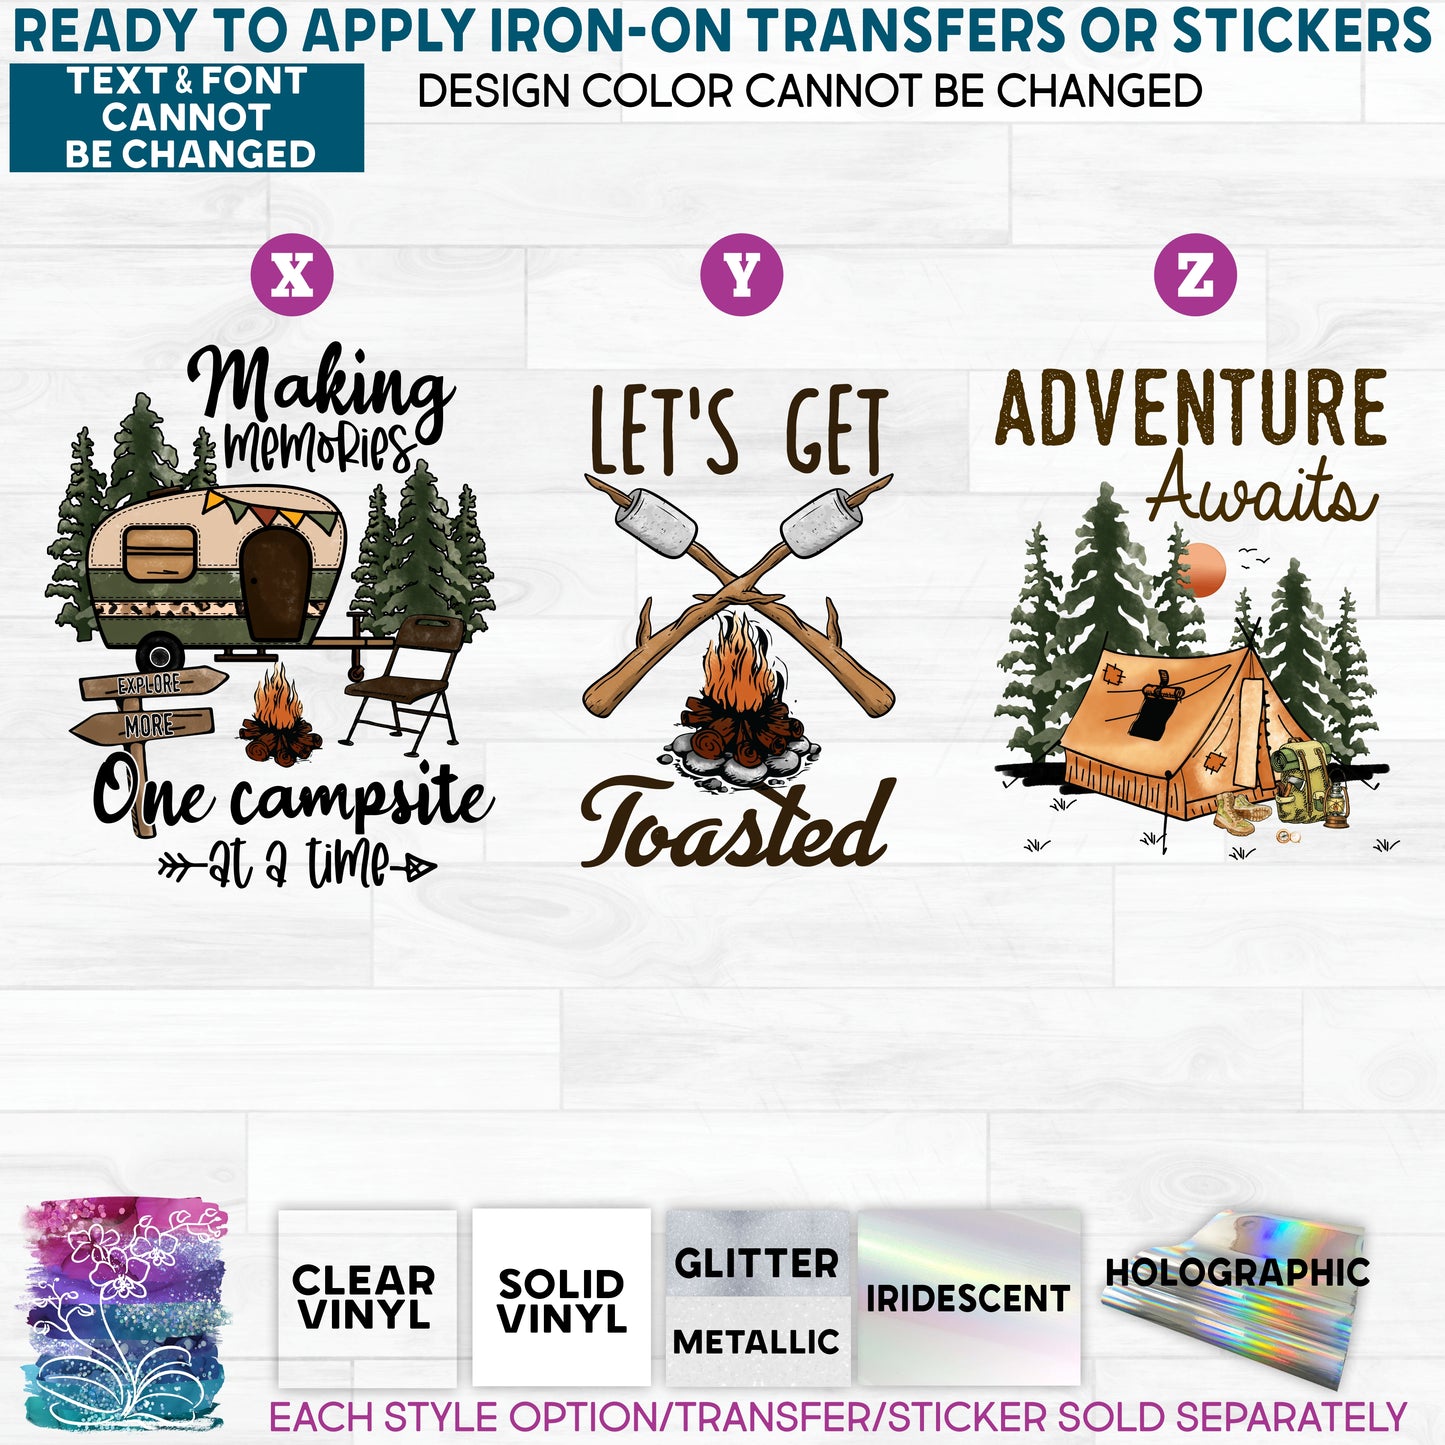 (s228-10) Making Memories One Campsite At a Time Glitter or Vinyl Iron-On Transfer or Sticker